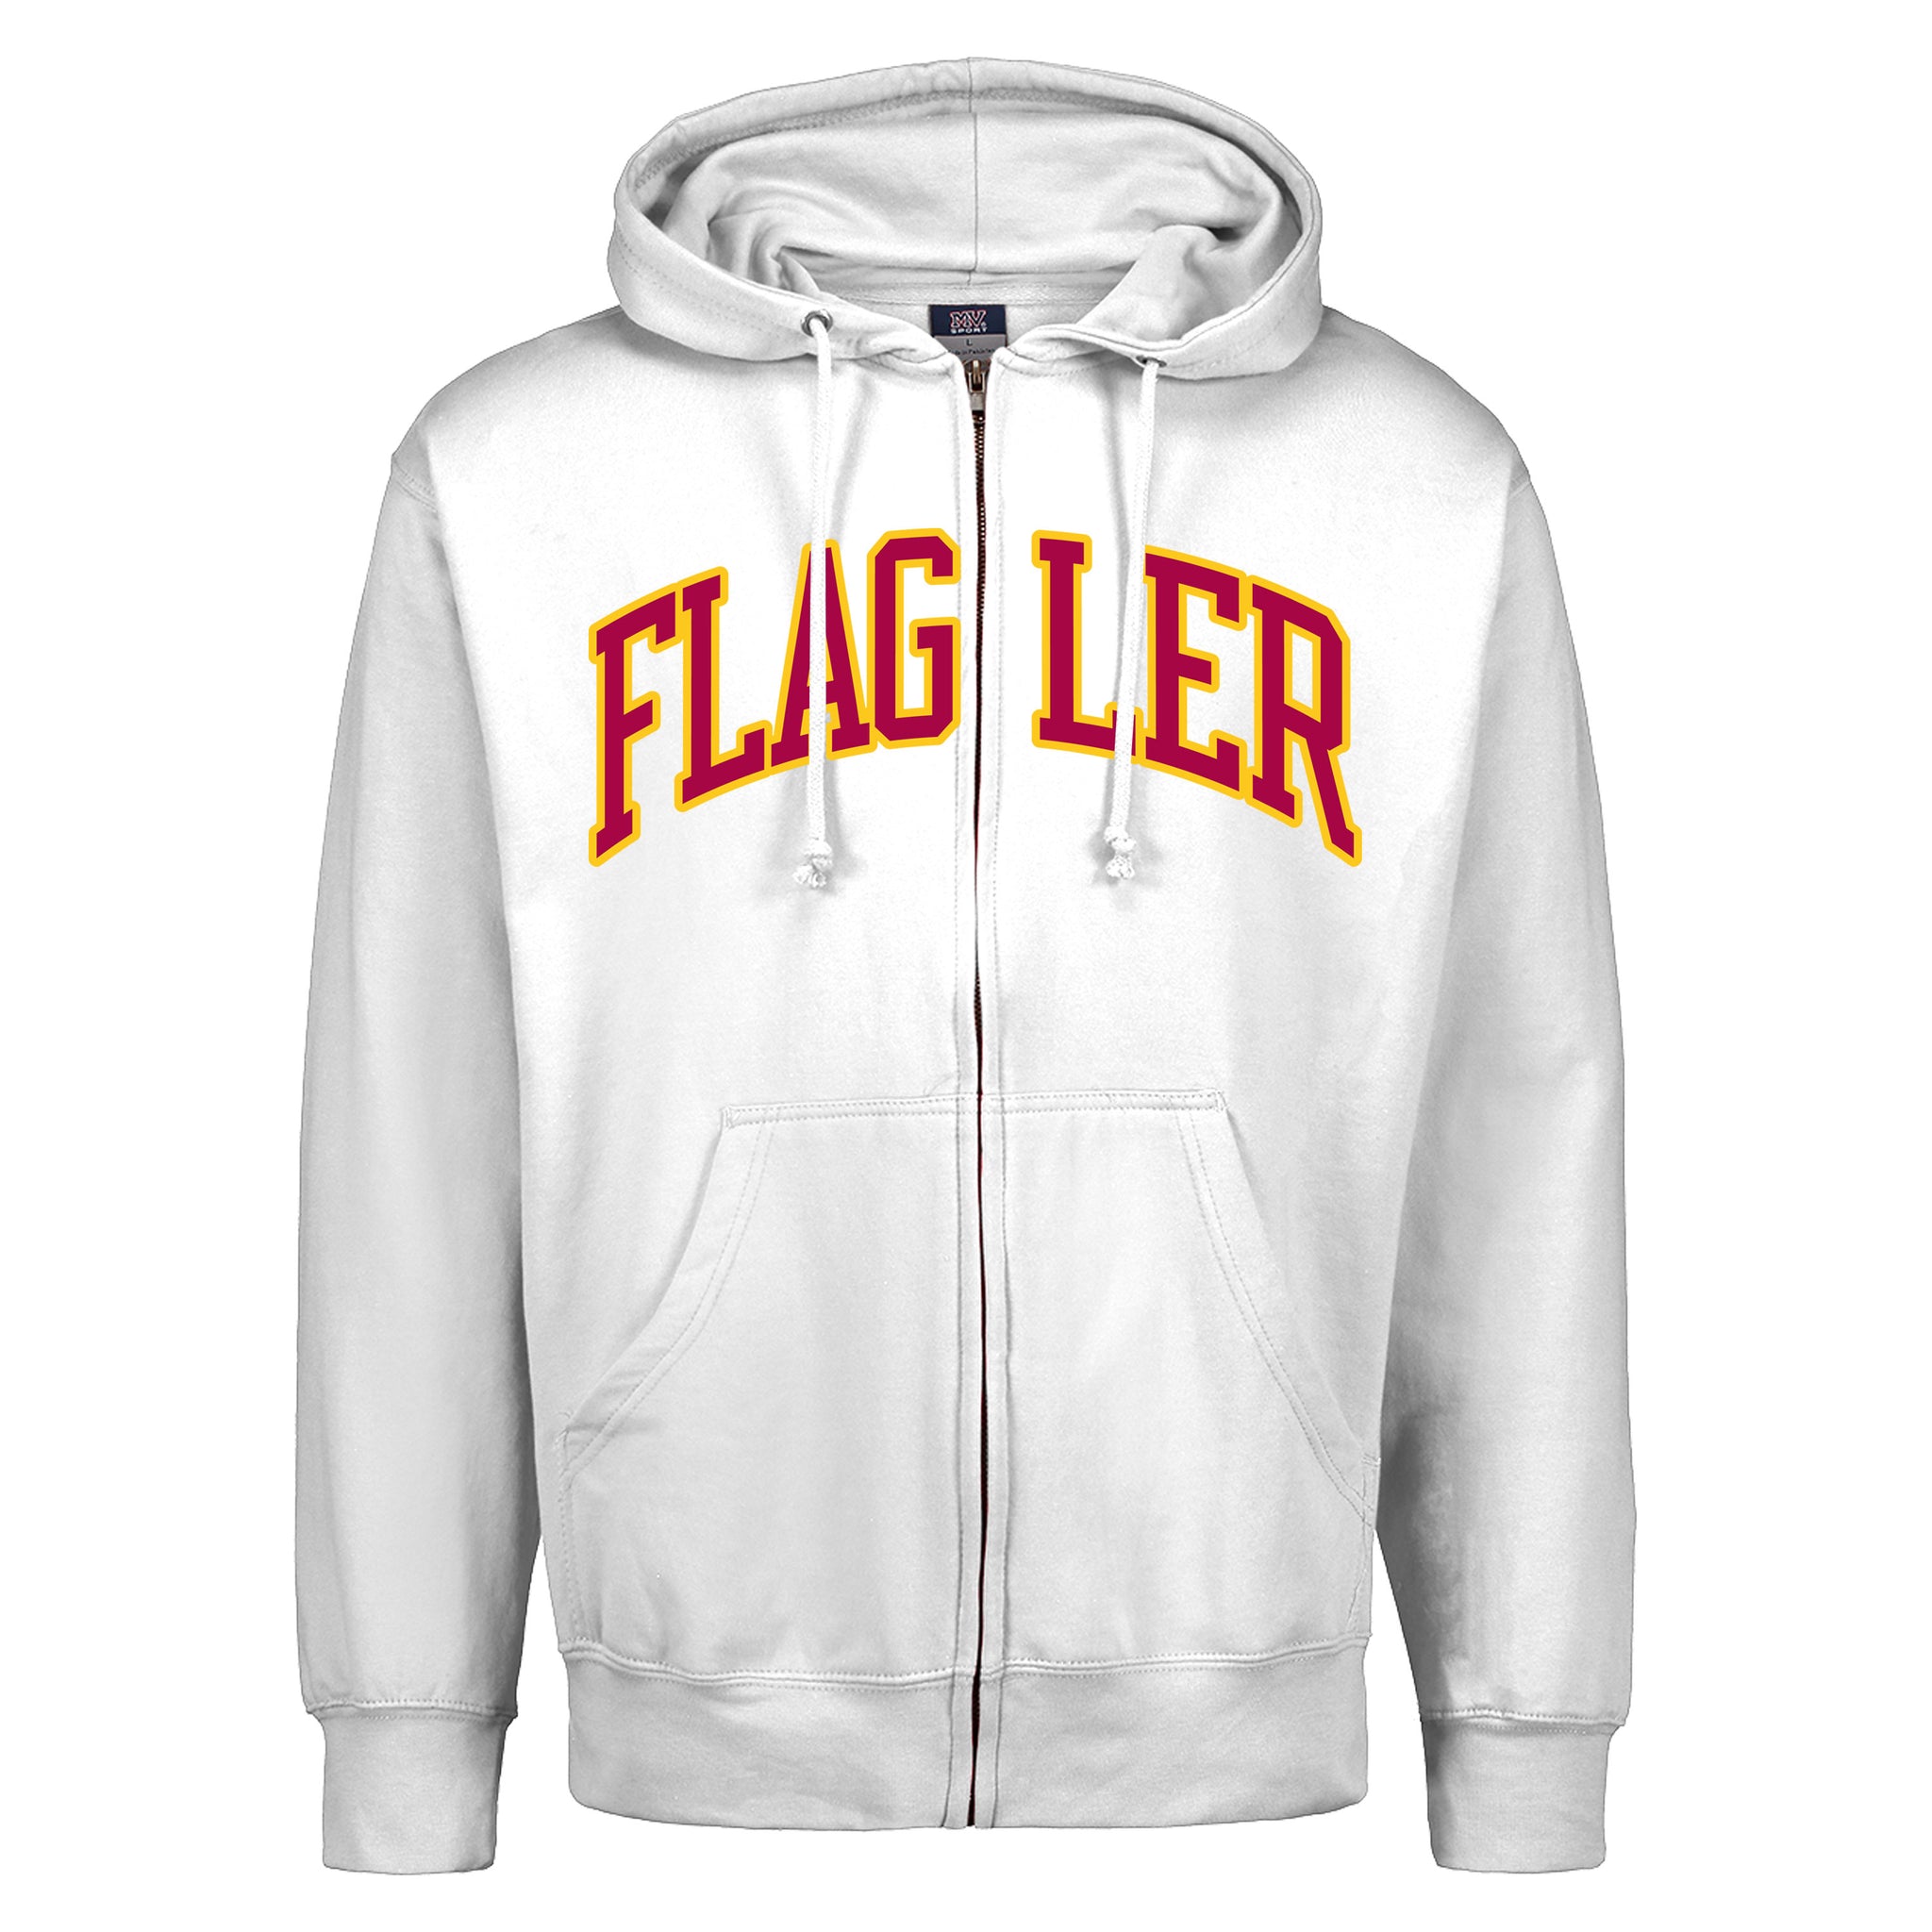 White full zip hood with crimson and gold imprint saying Flagler